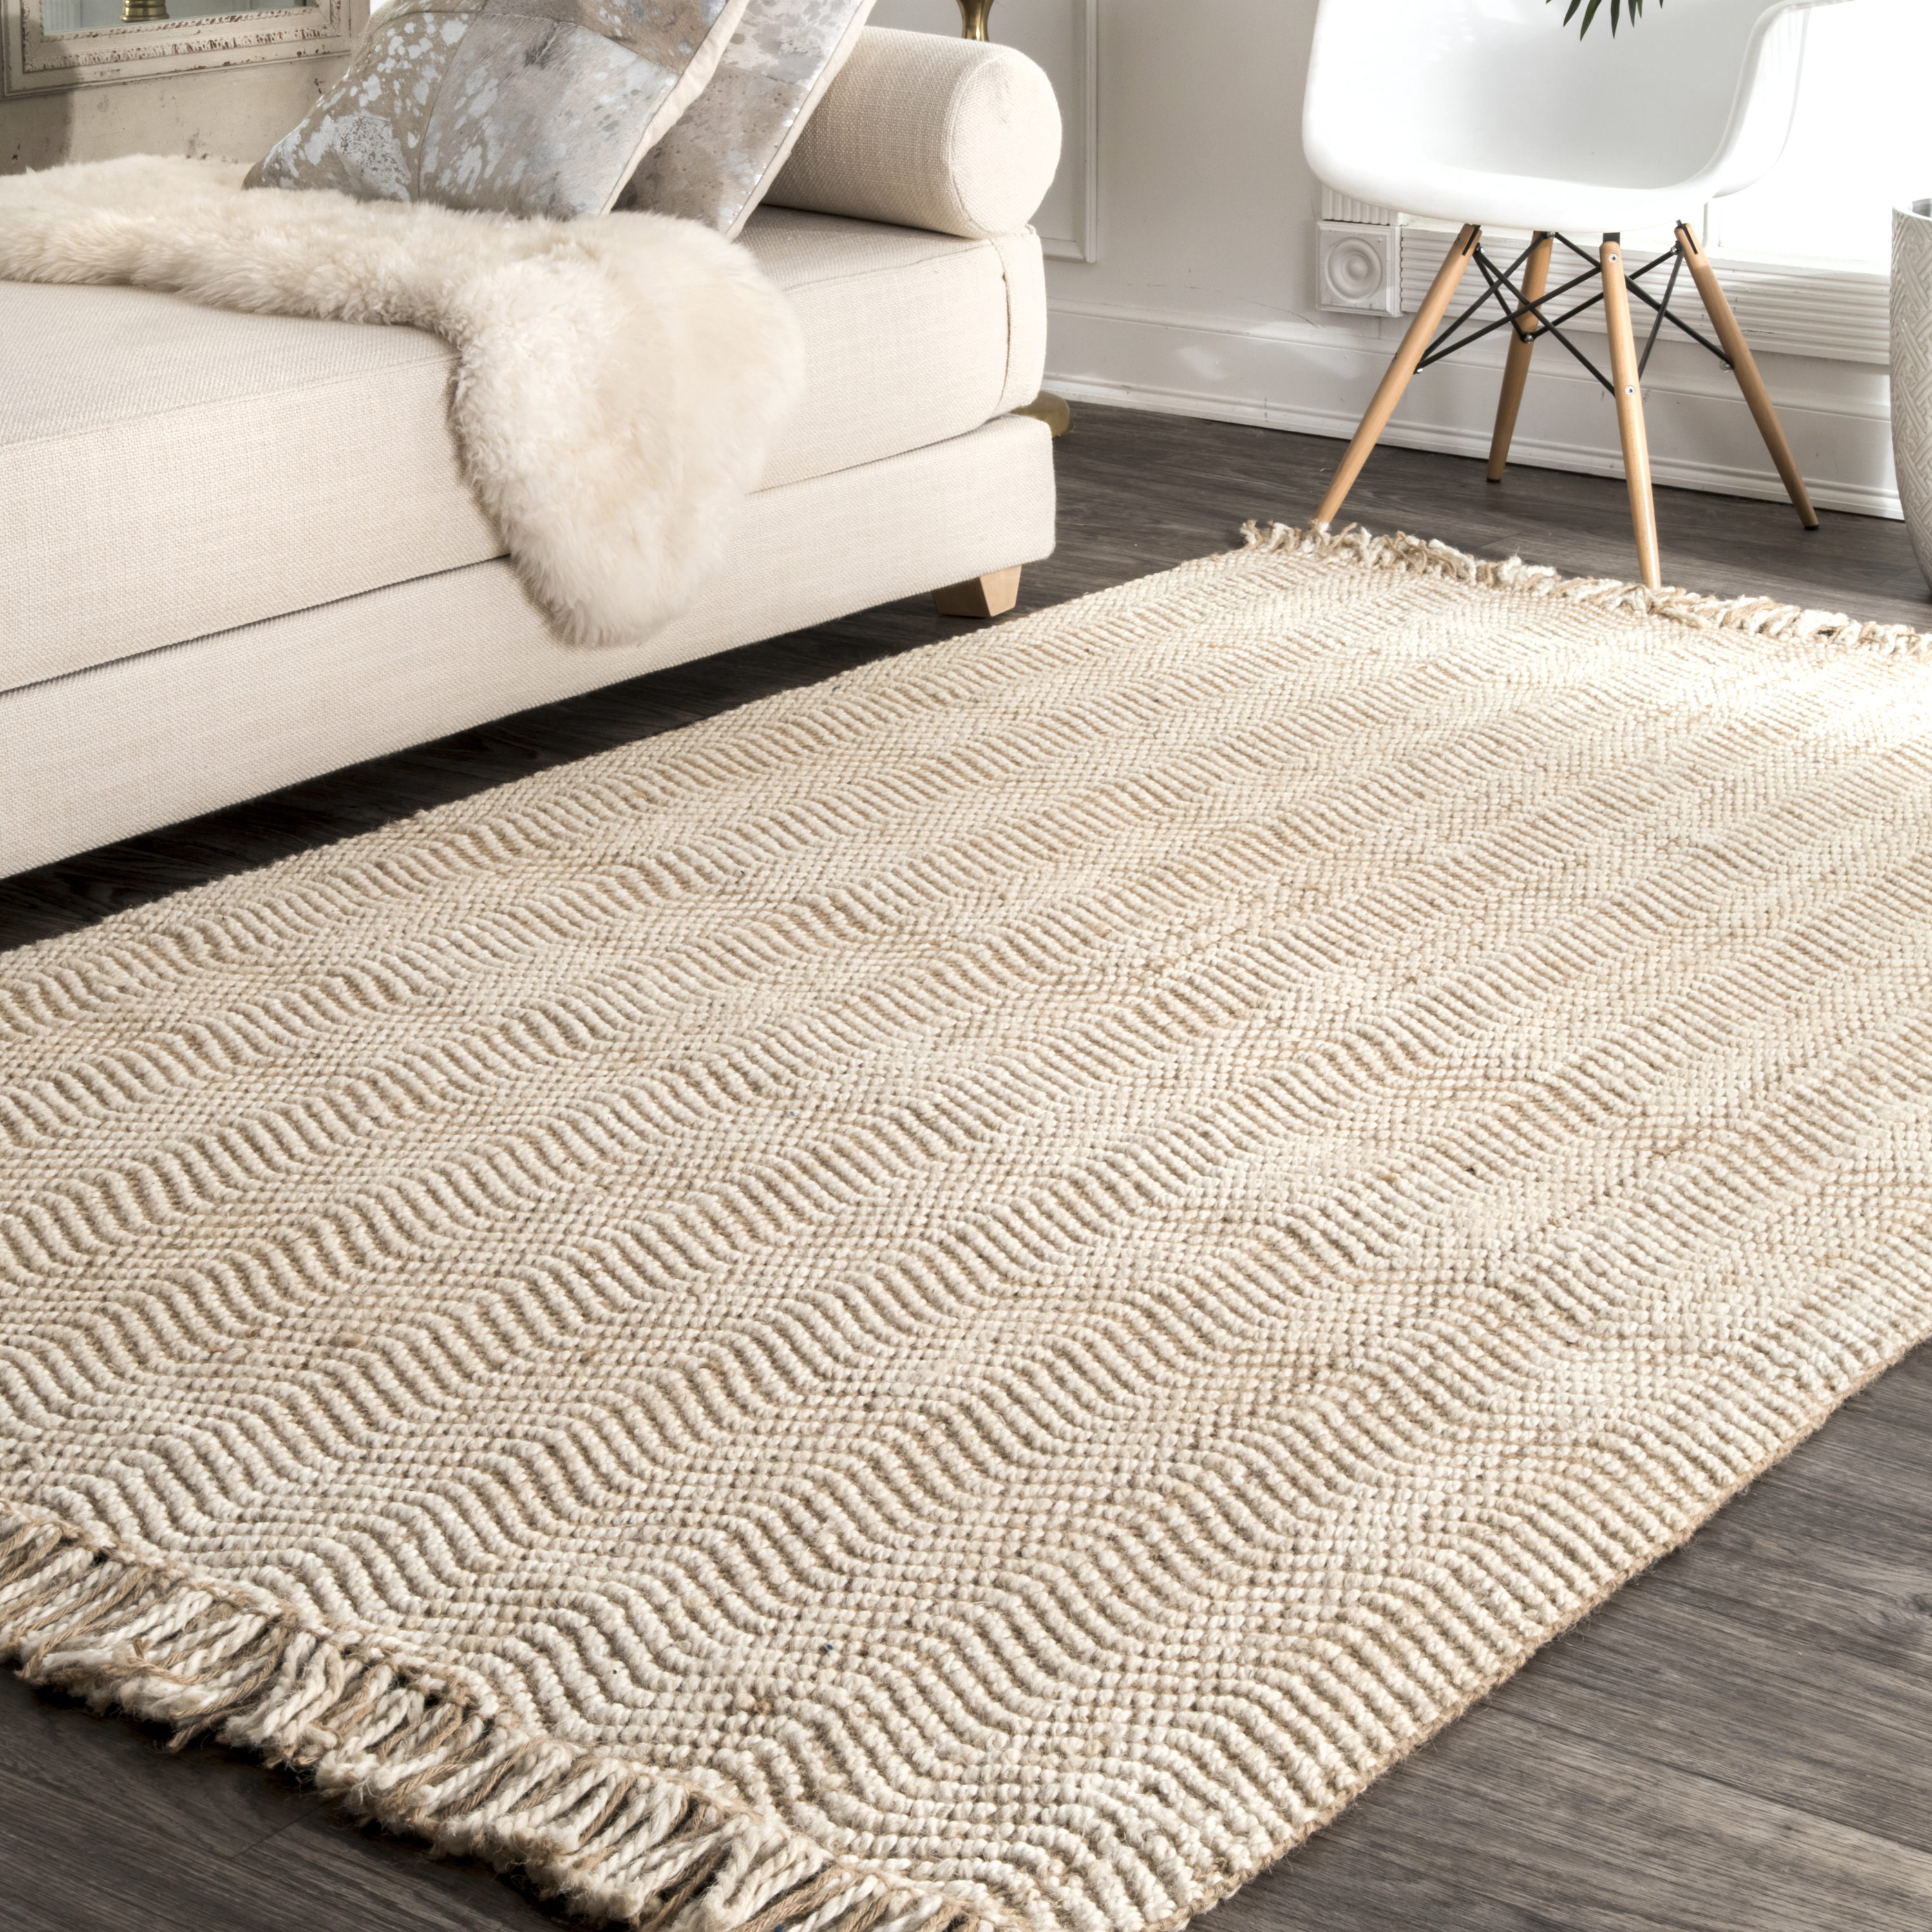 The Best Living Room Rugs (Splurge + Save) - A Beautiful Mess